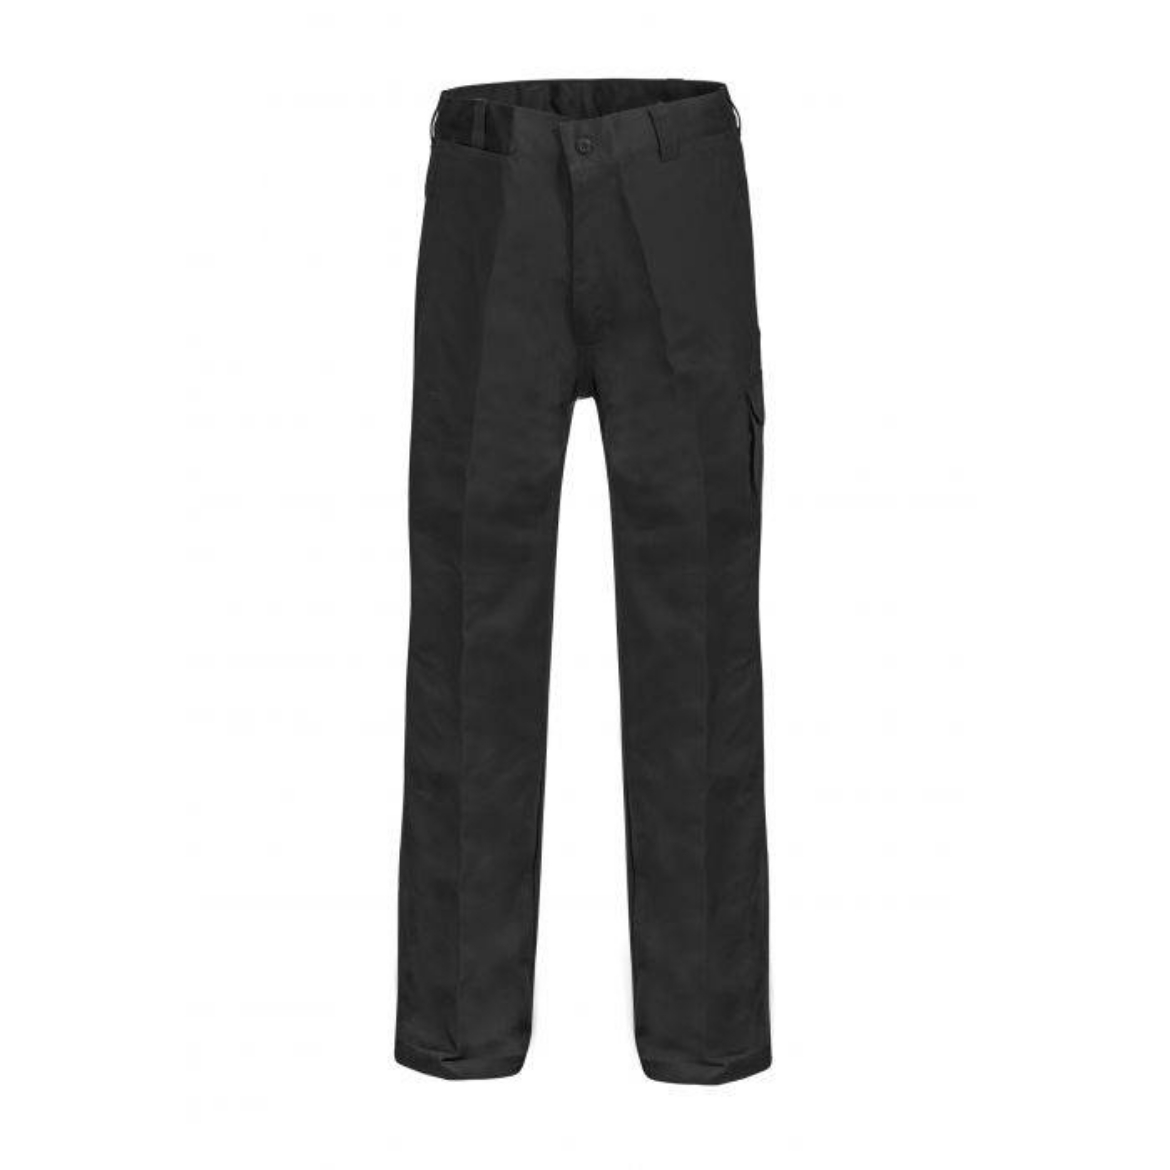 Picture of WorkCraft, Cargo Poly/Cotton Trouser